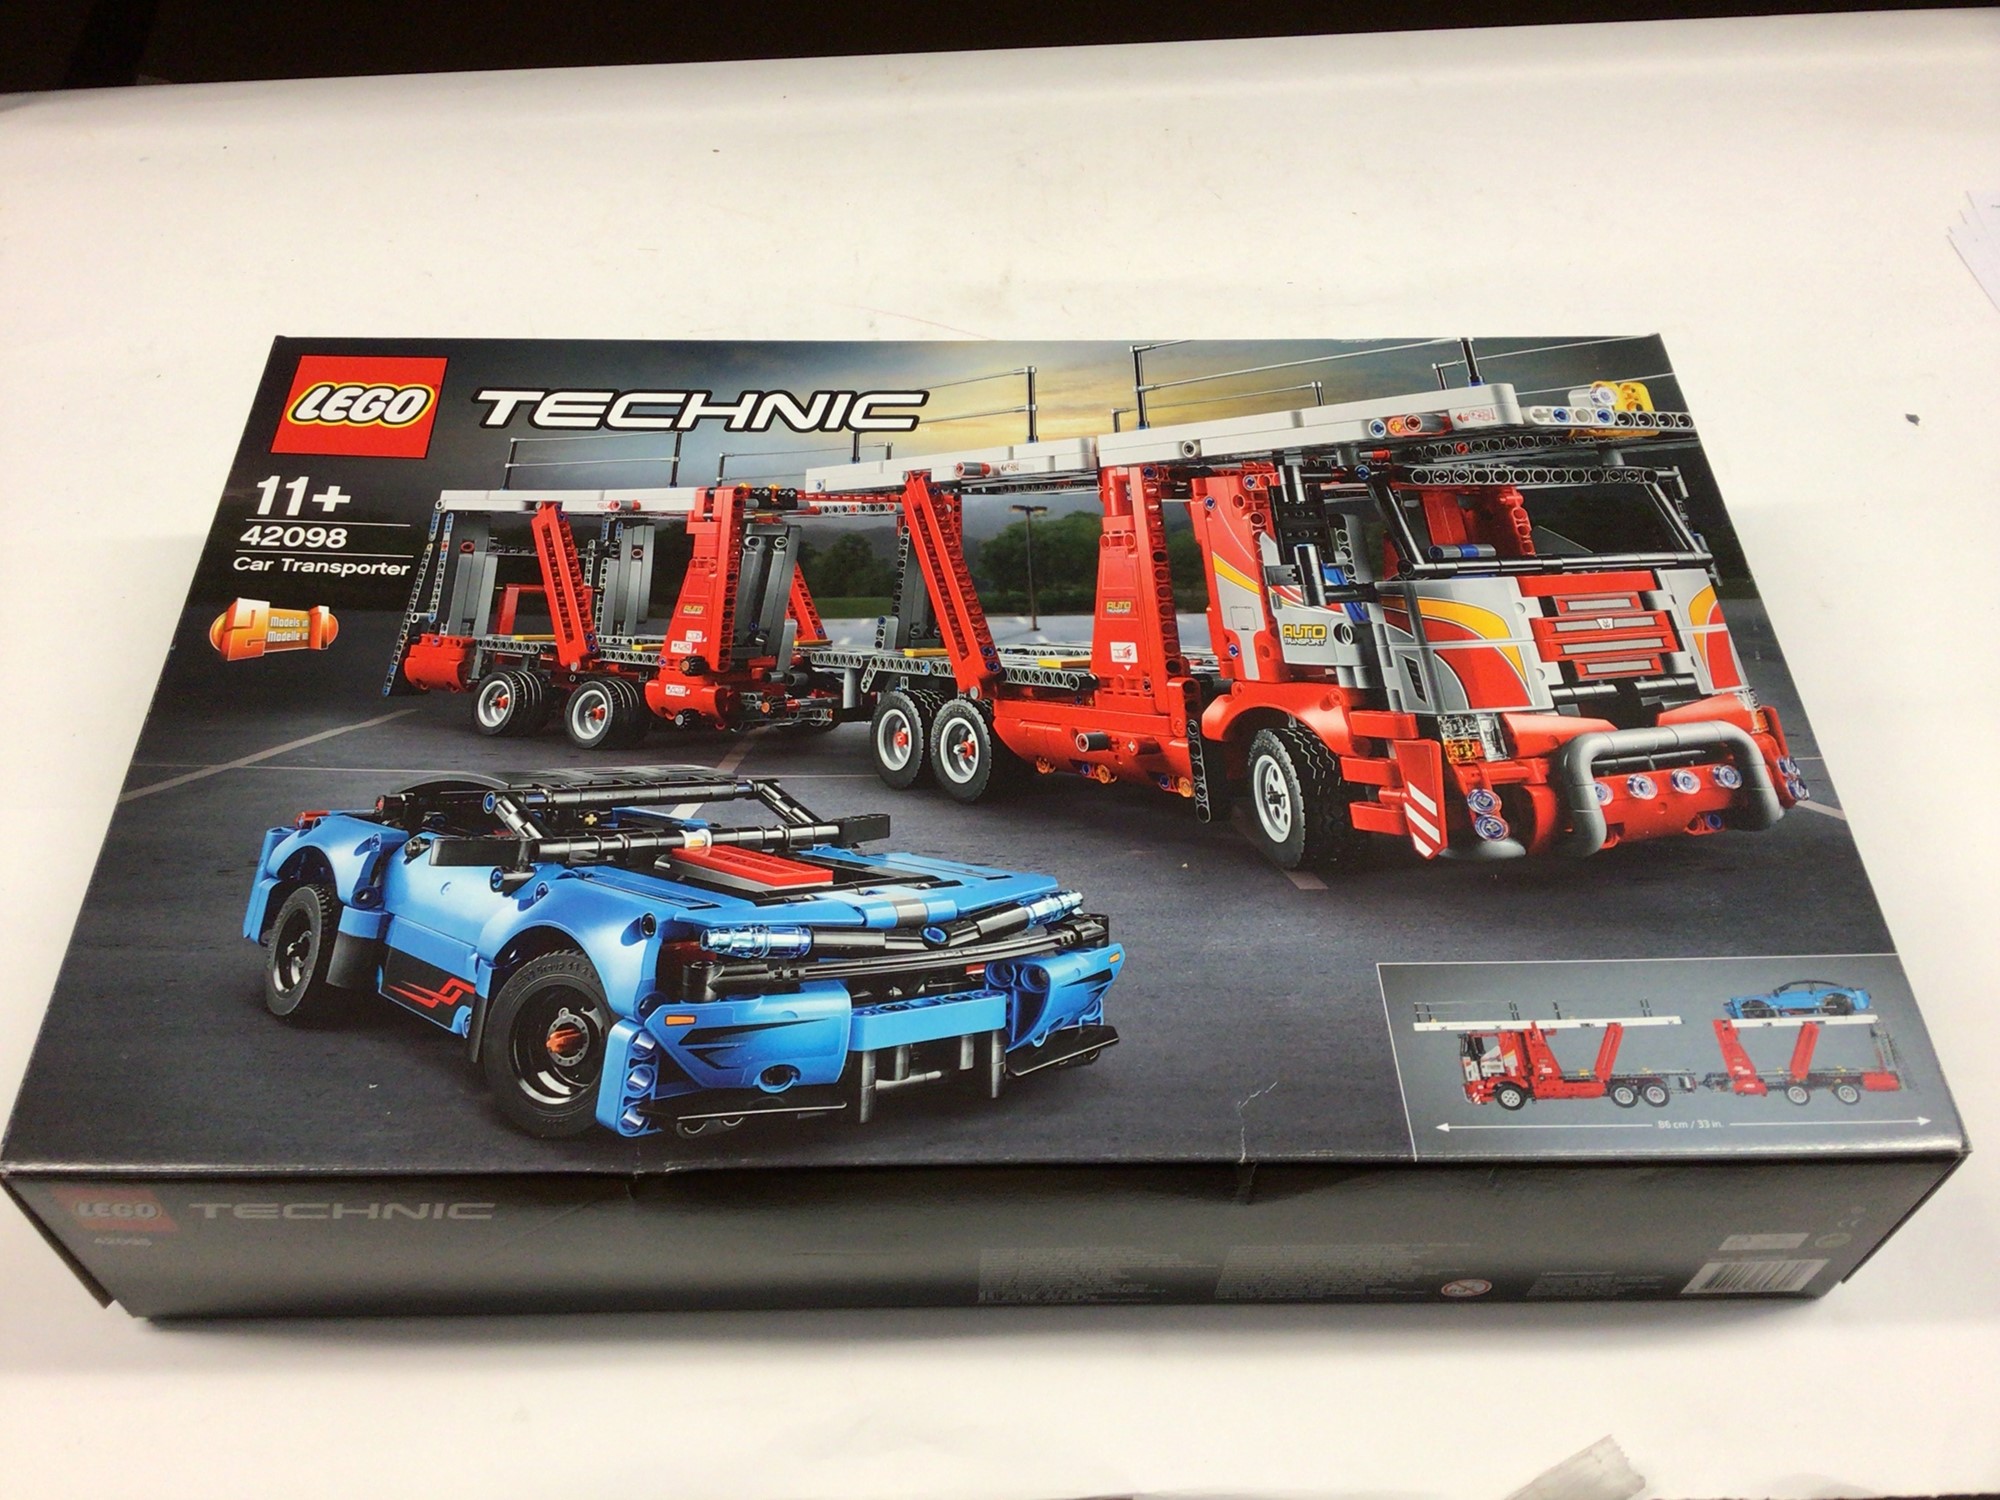 Lego 42098 Car with Boxed